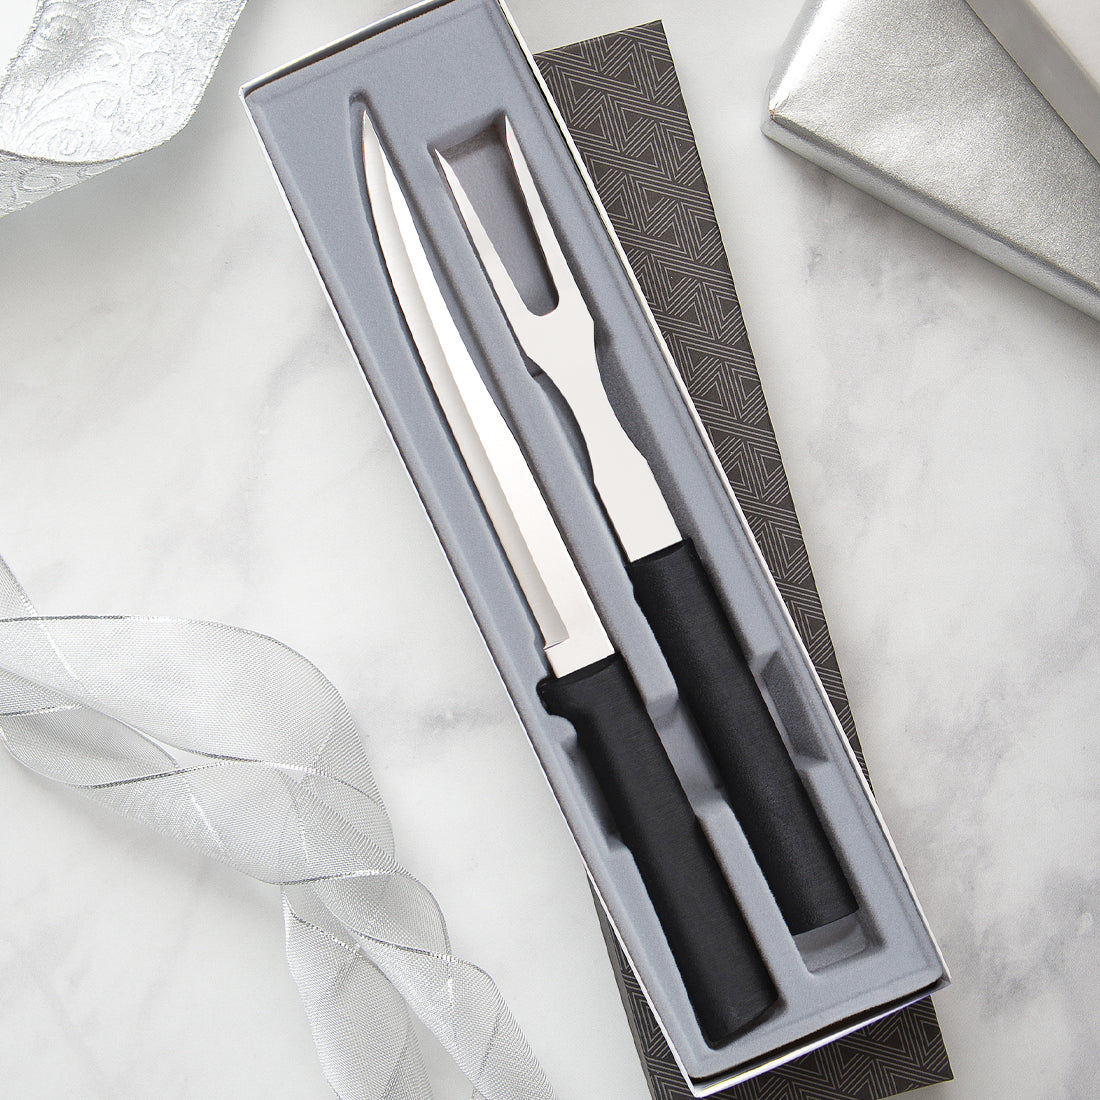 Rada Cutlery Meal Prep 4-Piece Paring Knife Gift Set – Stainless Steel  Blades and Aluminum Handles